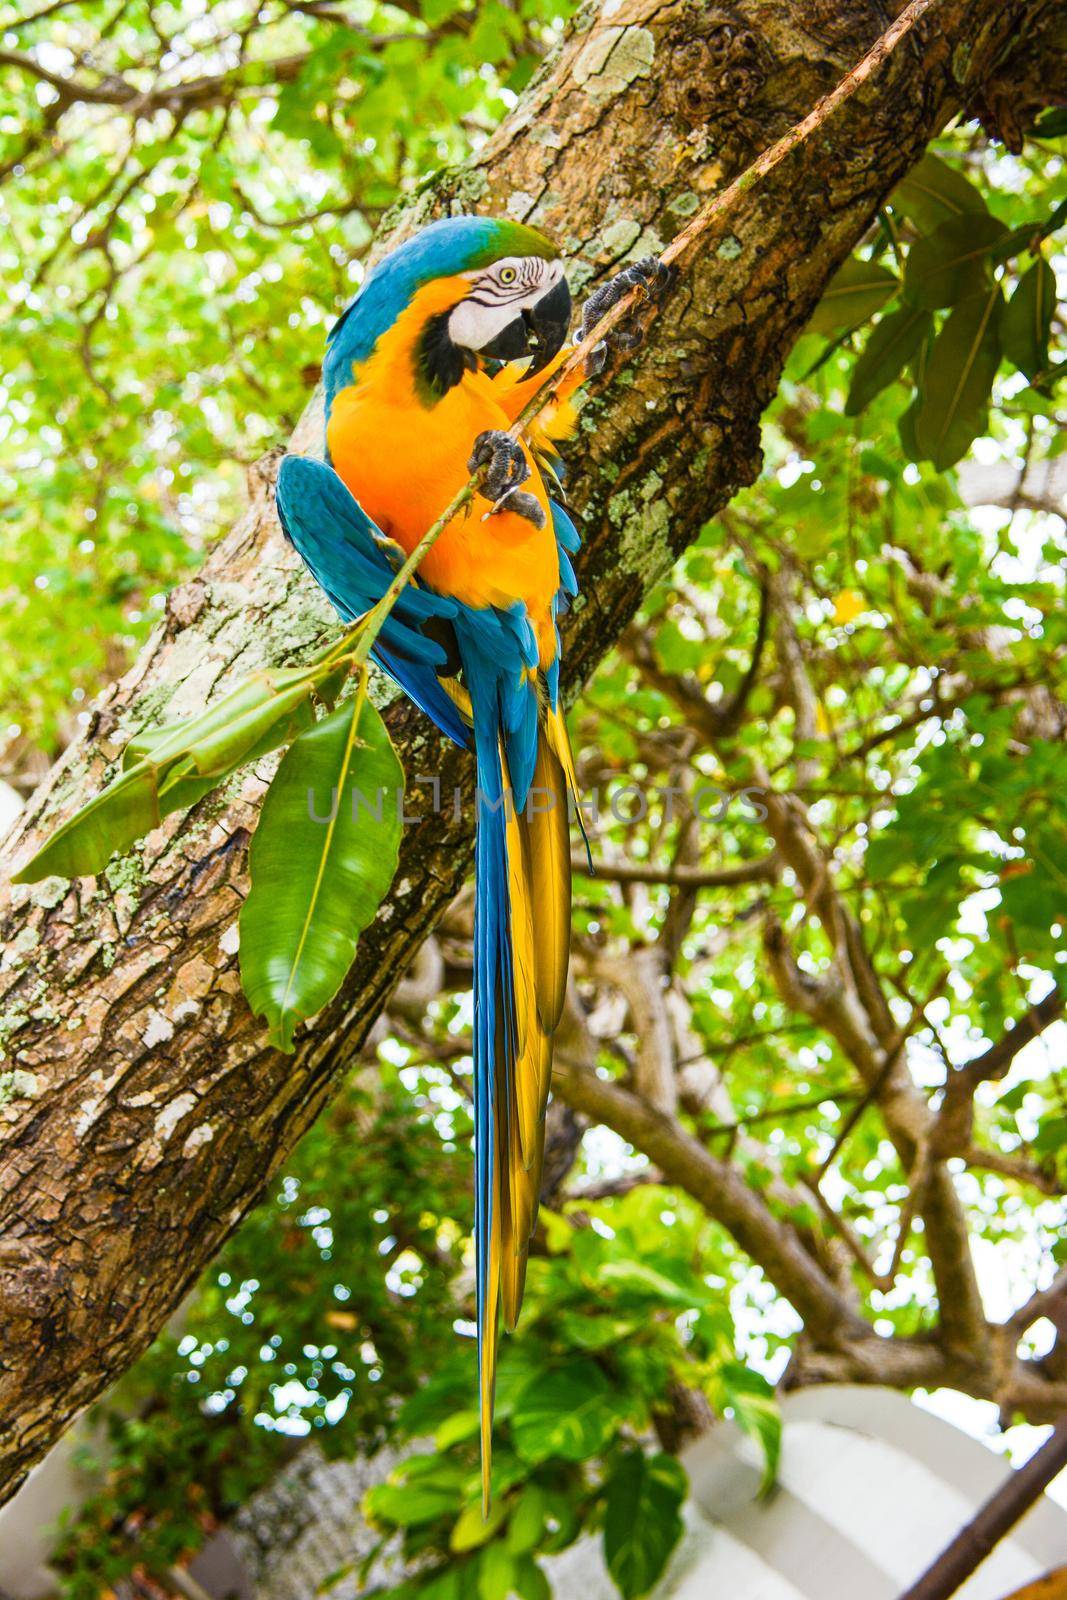 colored parrot that to have food makes the acrobat cling to a tree branch